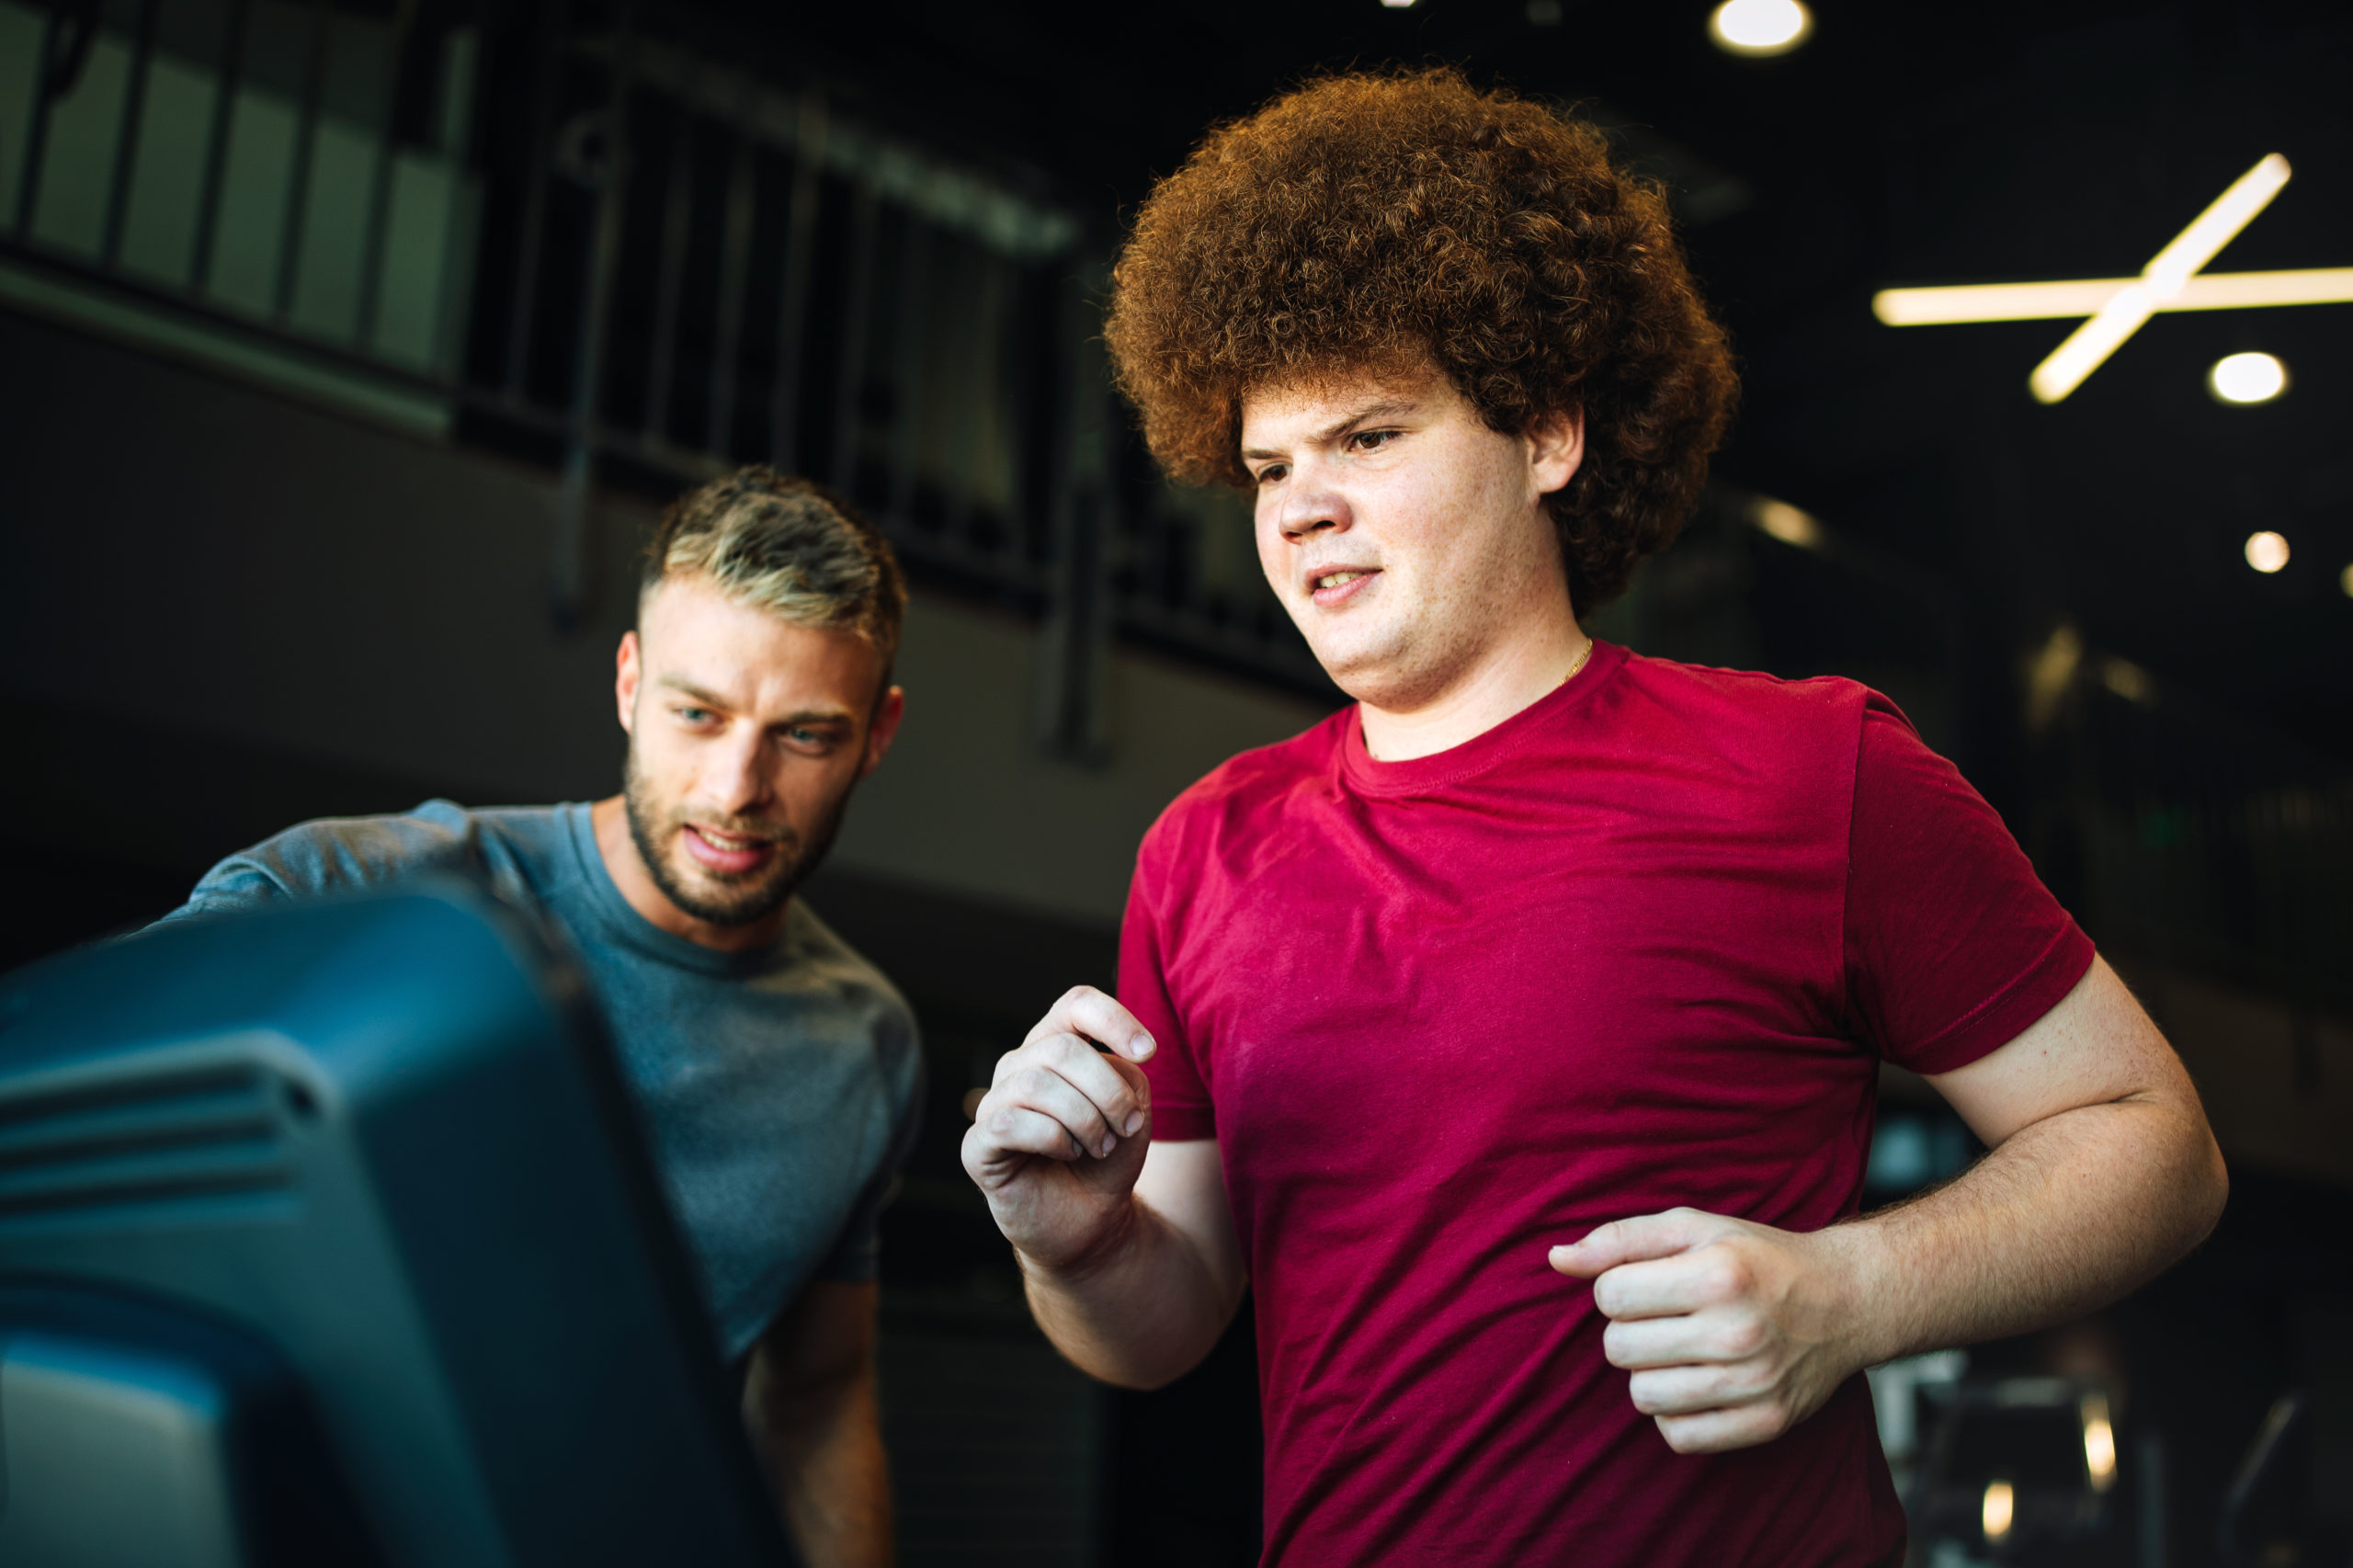 Overweight young chubby man exercising gym with personal trainer